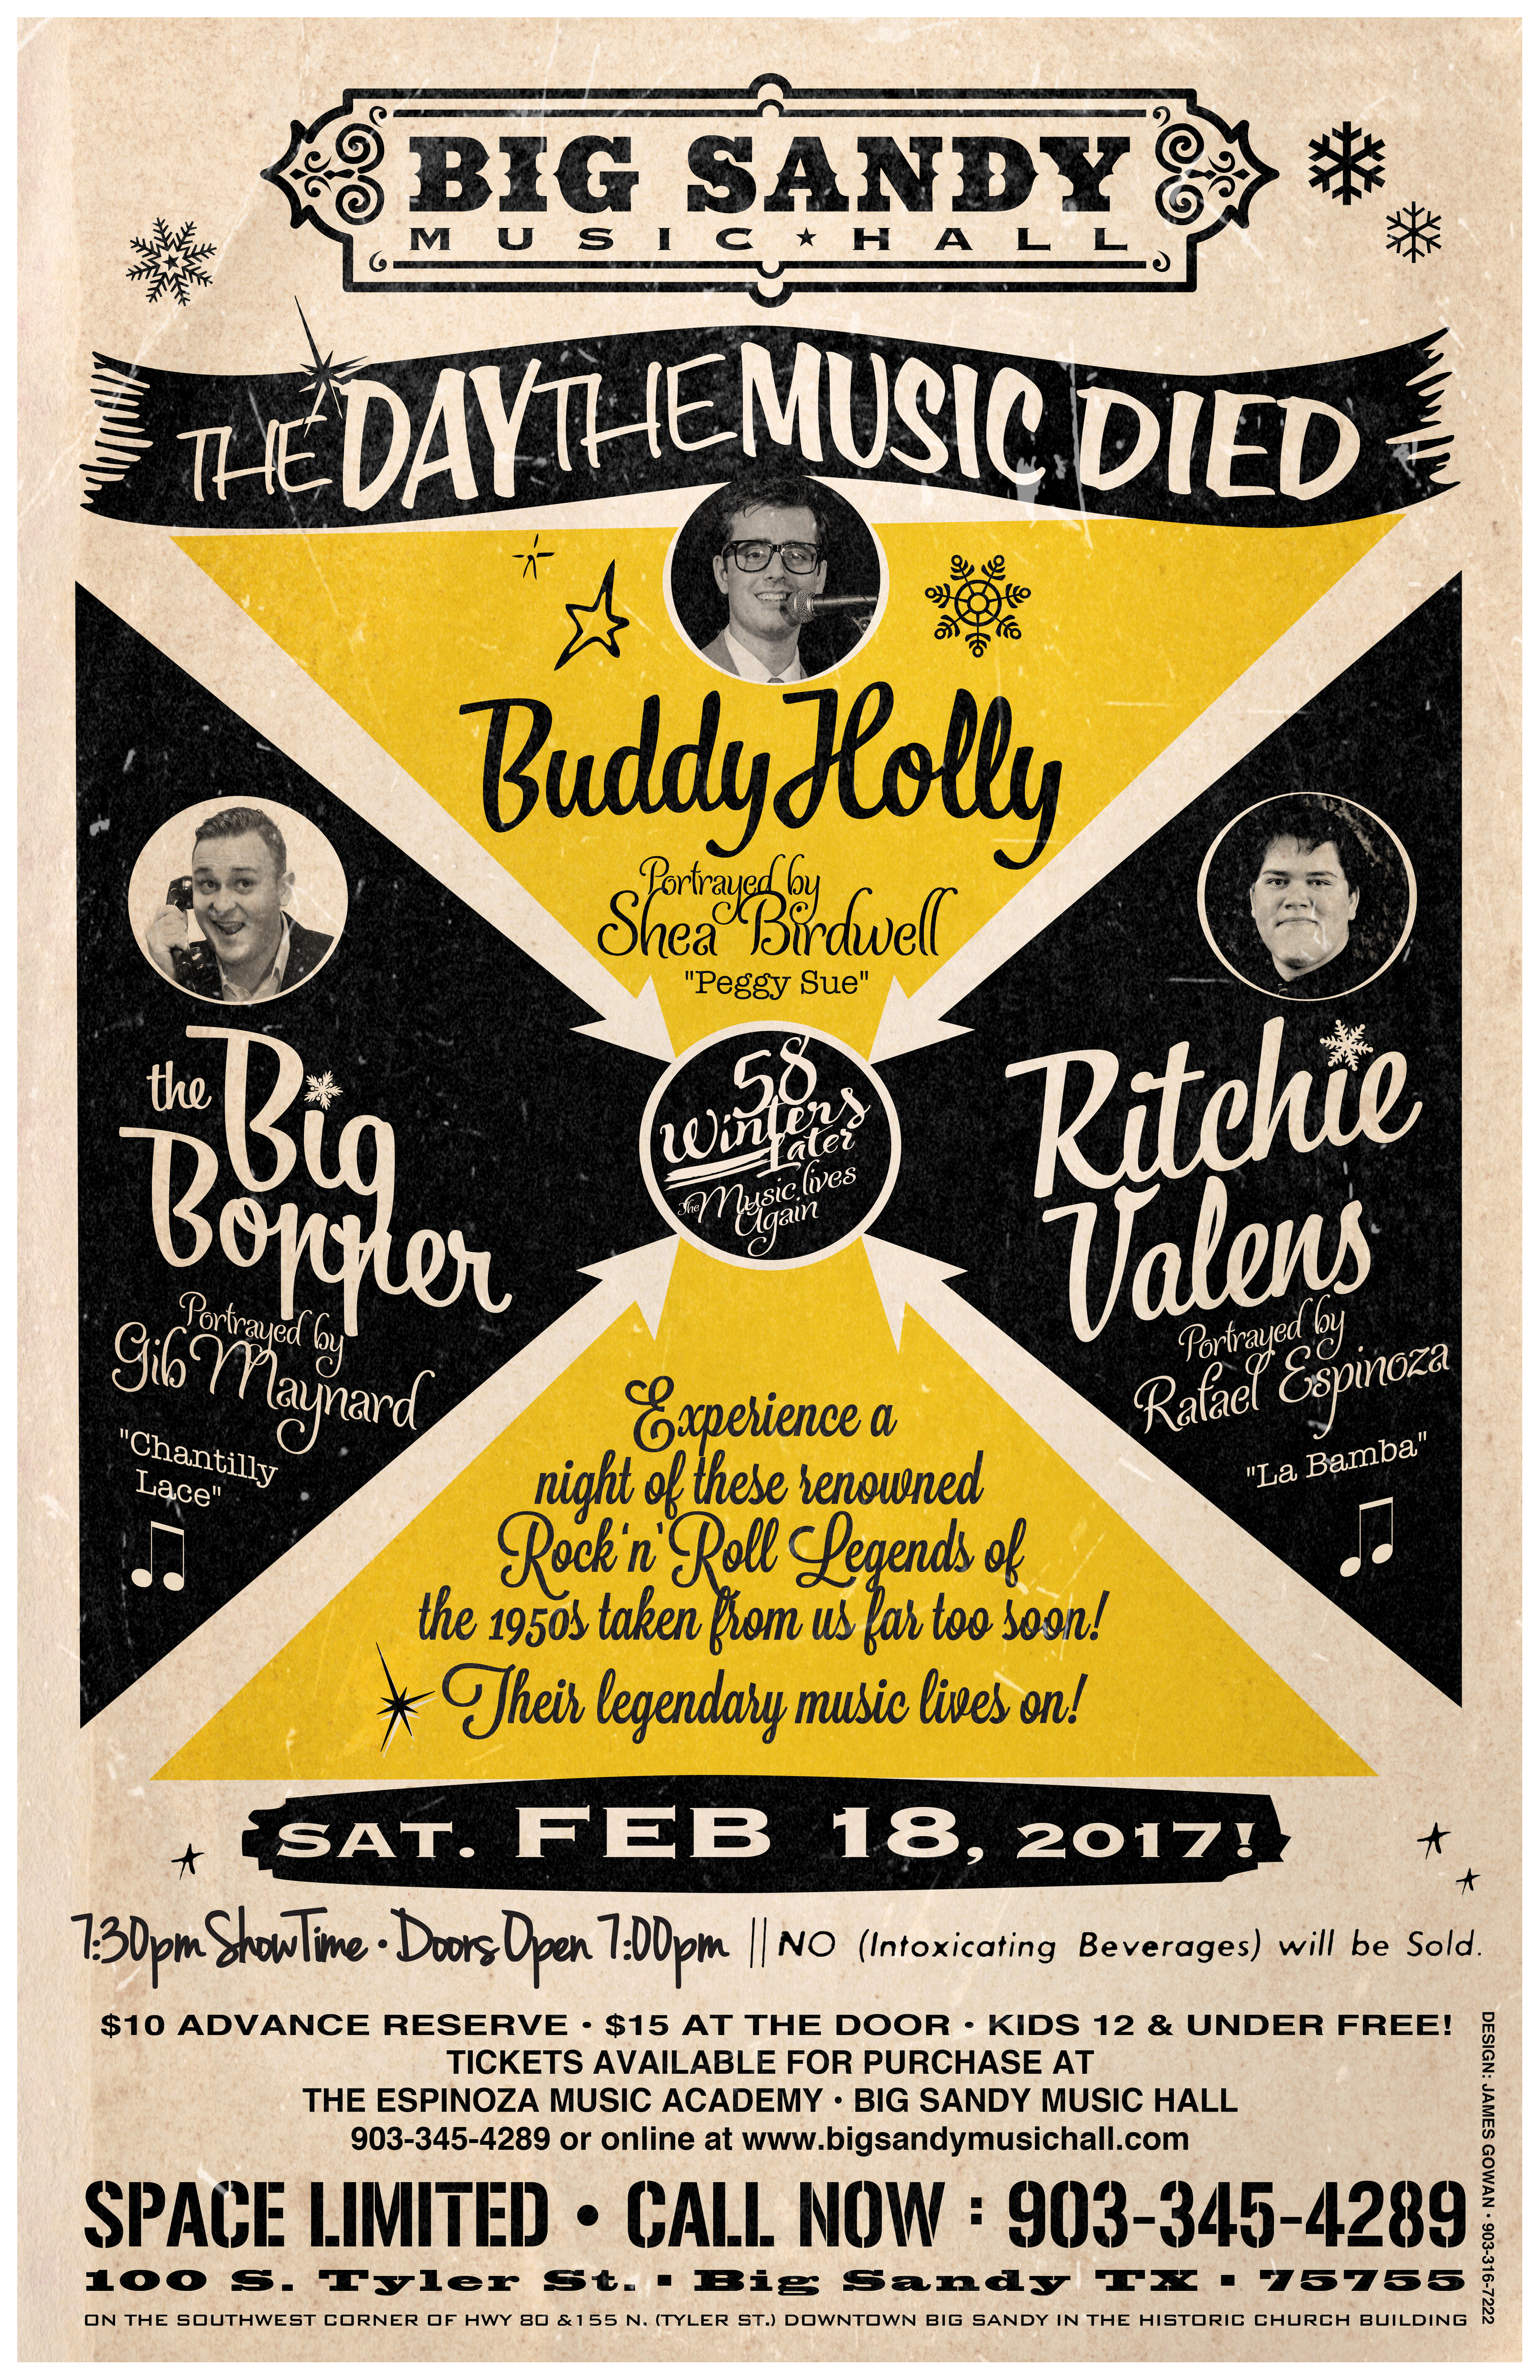 The Day The Music Died #4